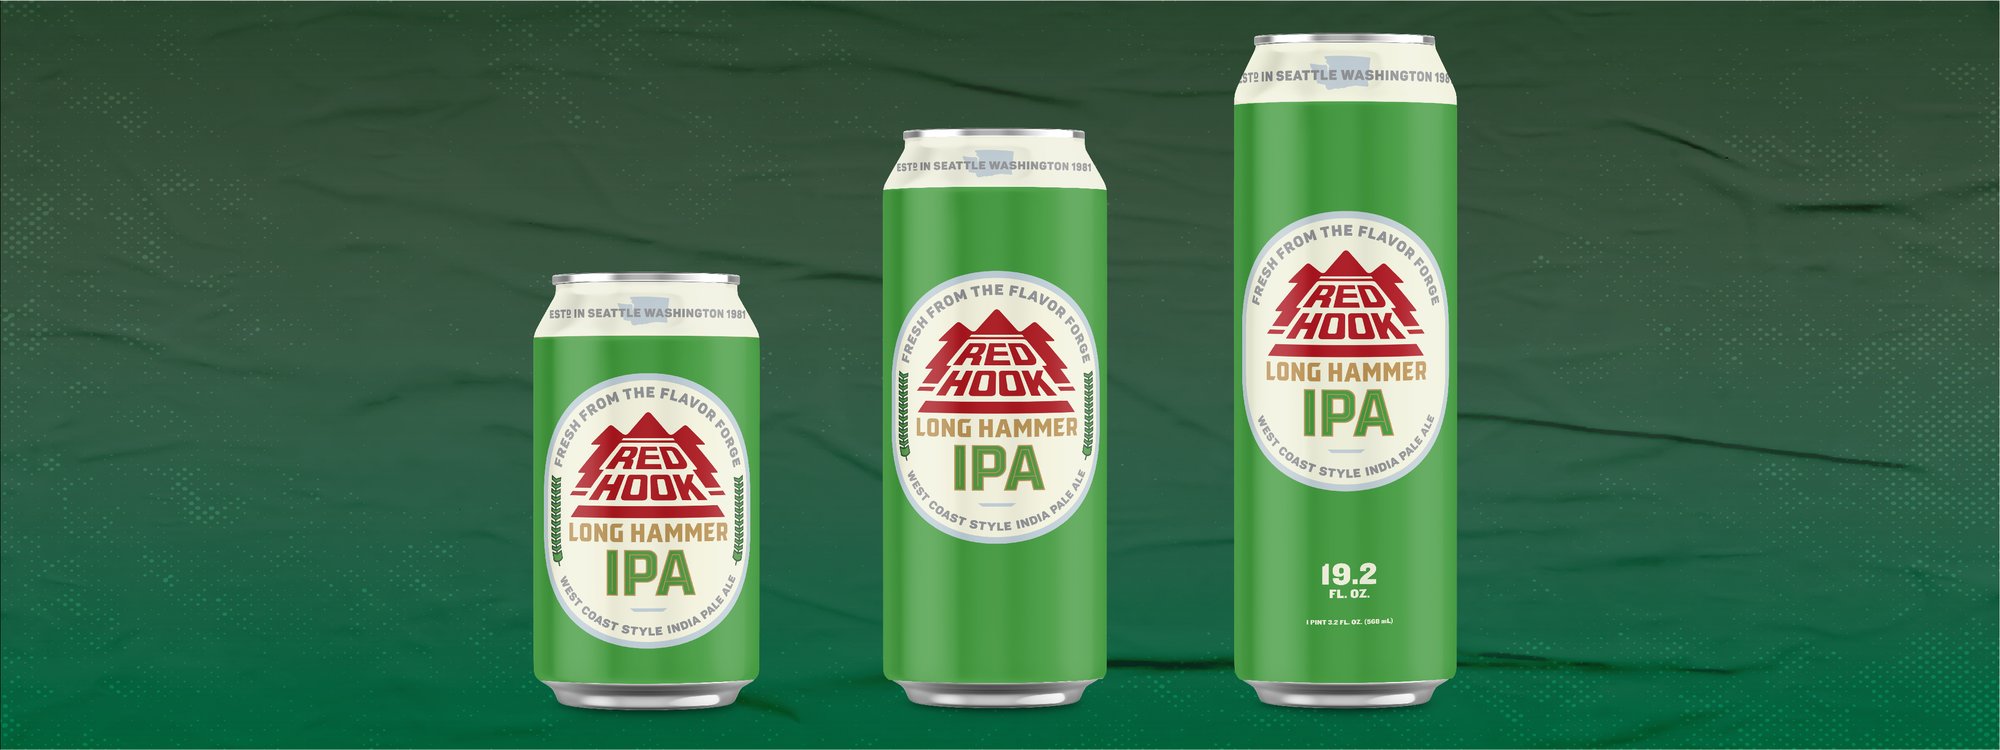 Redhook Extra Longer Hammer IPA or Long Hammer India Pale Ale three different product sizes with red and green labels. 